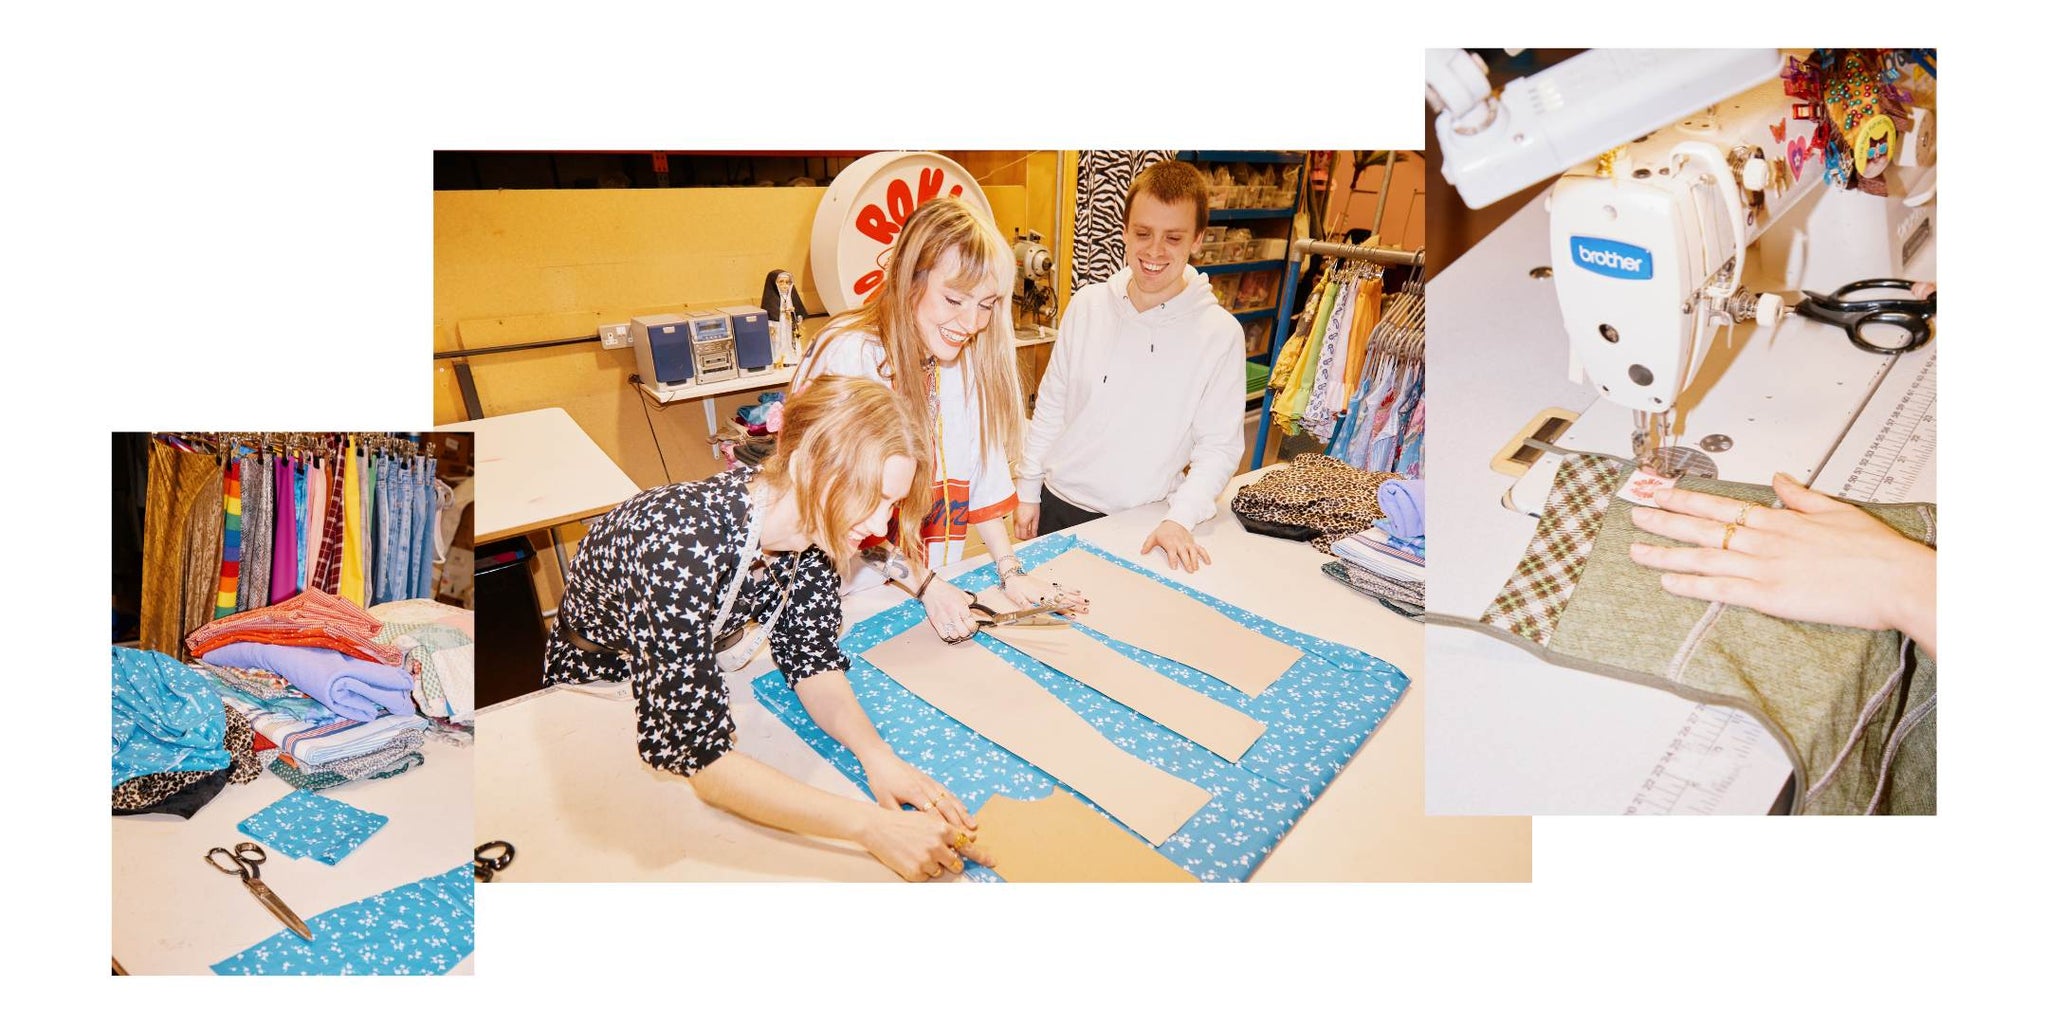 Collage of 3 photograph images with high exposure. Left image shows a pile of fabrics on a white table with a pair of scissors with a background of a rail of clothes. Central image shows two women and a man standing over a large table all smiling and looking at sewing patterns. Right image shows a hand at a sewing machine with a garment showing the Rokit Originals logo. 